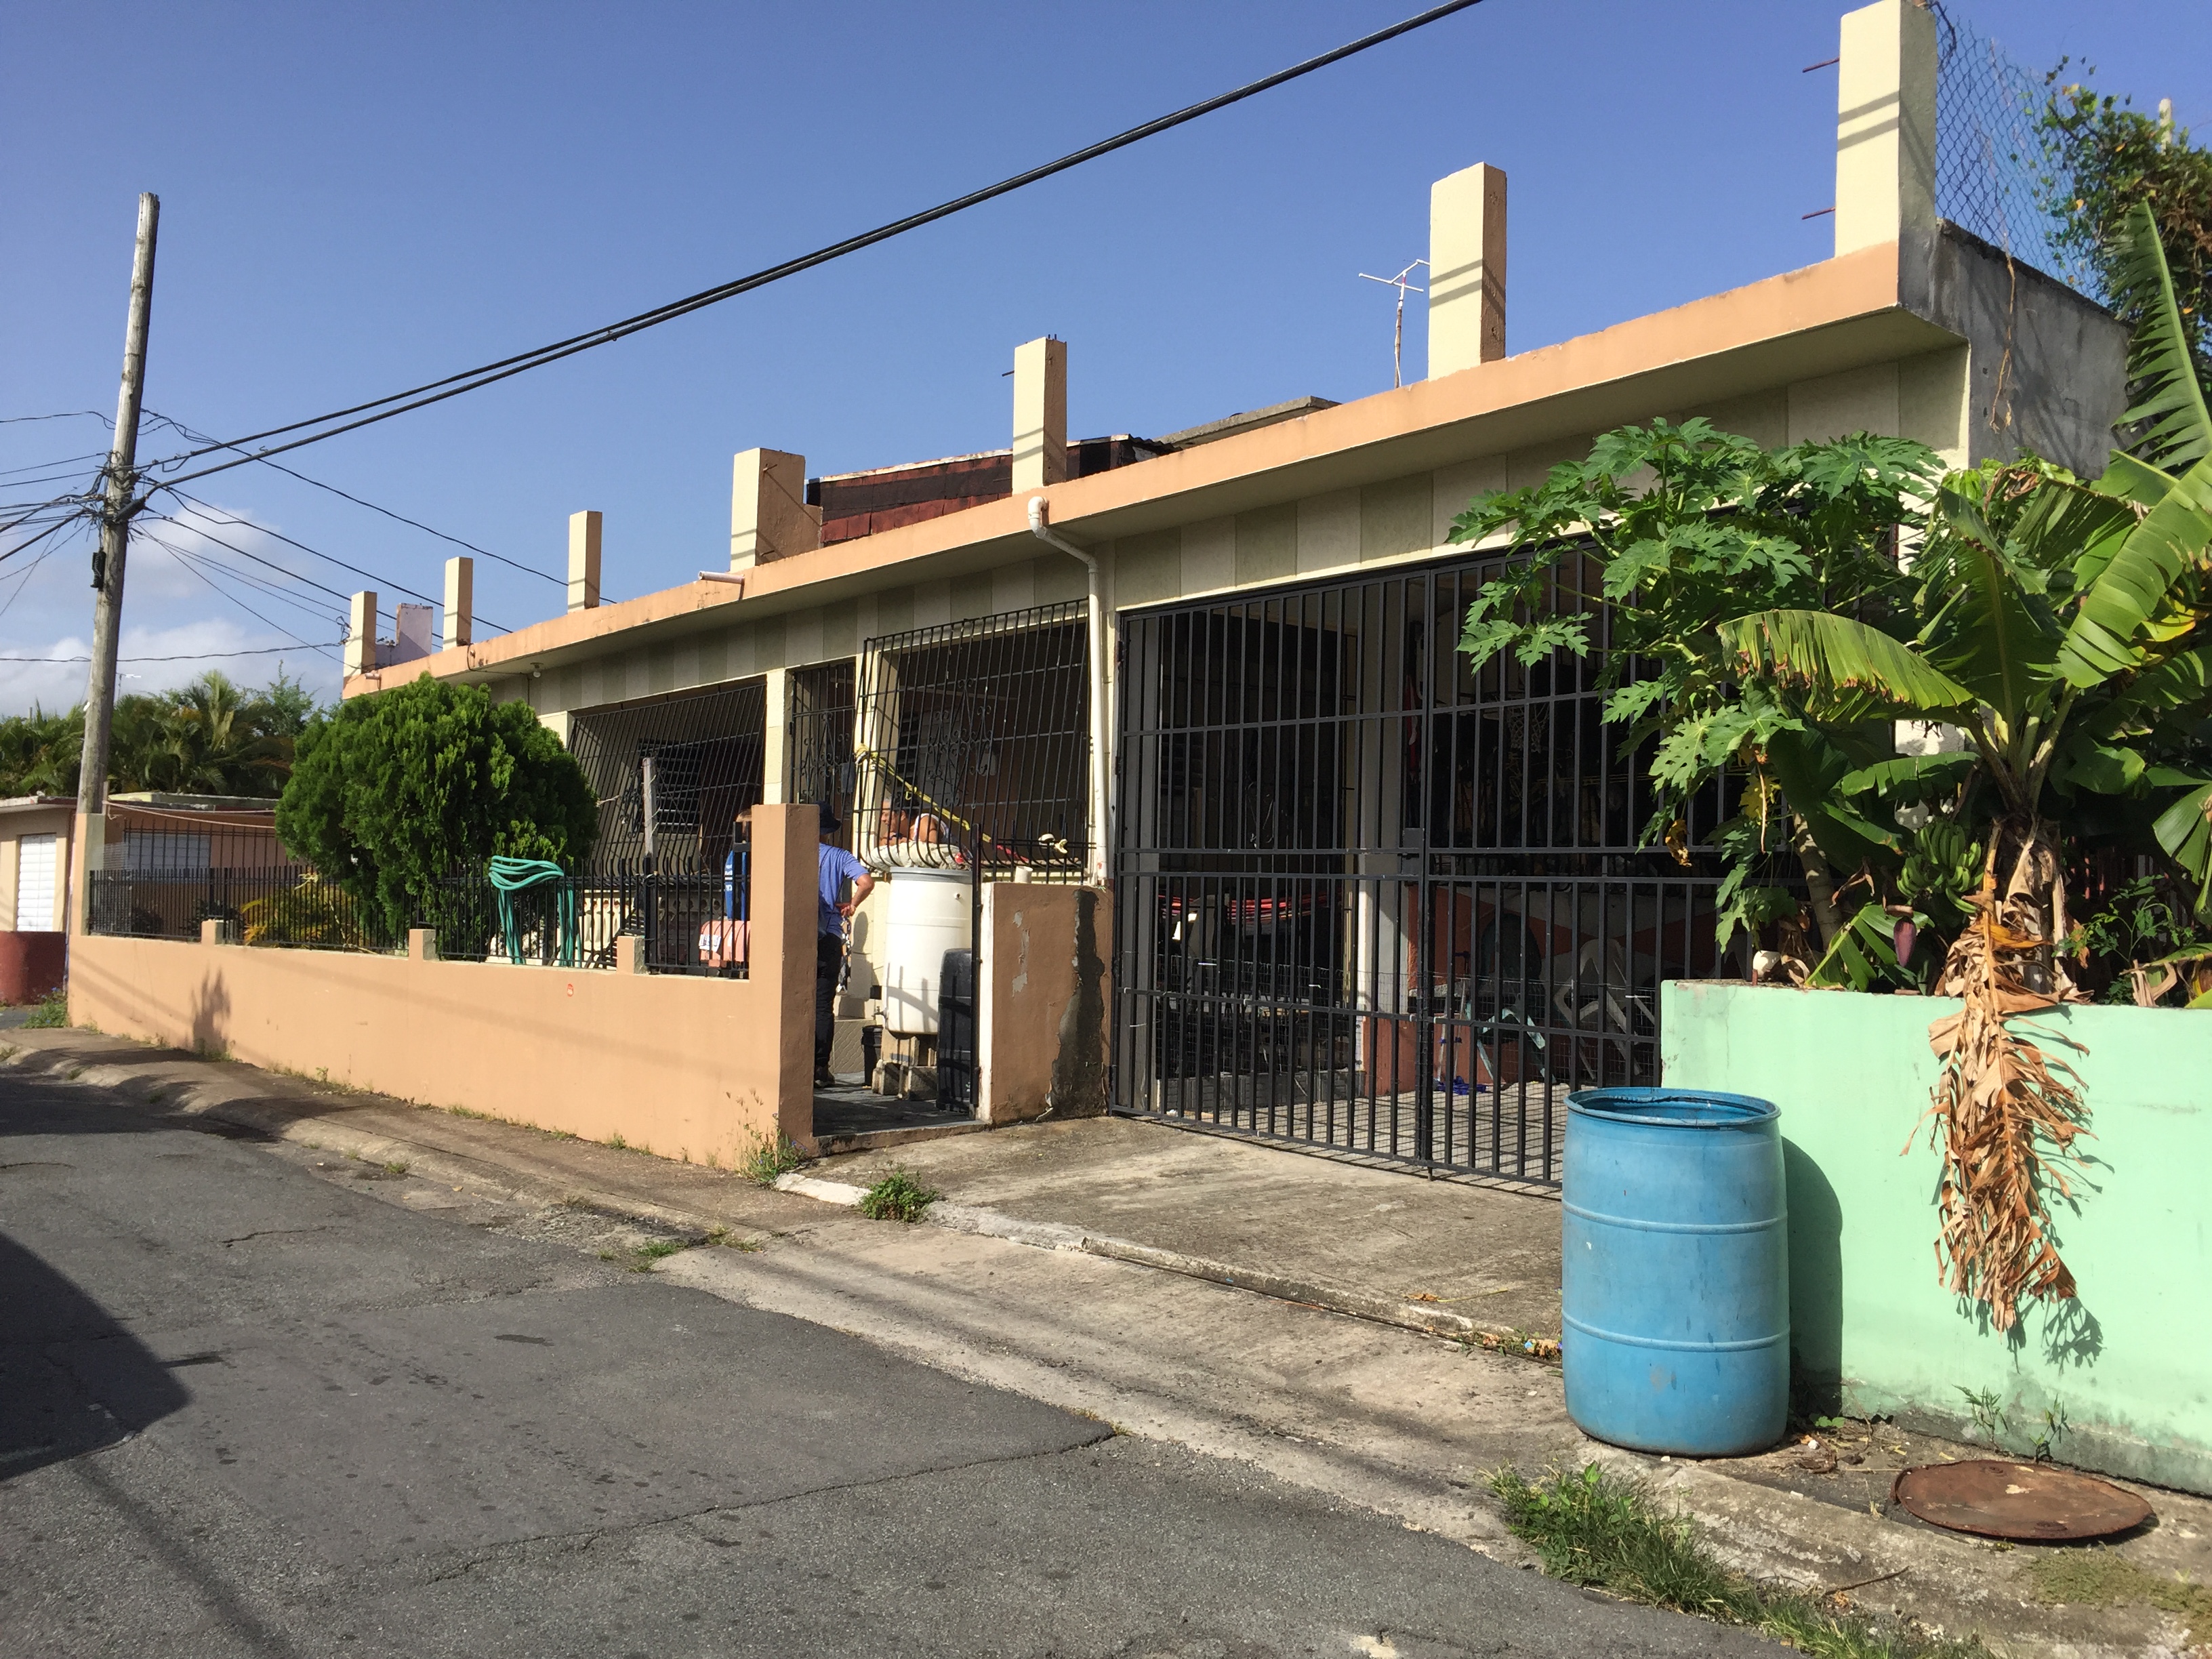 Exterior of home in Puerto Rico